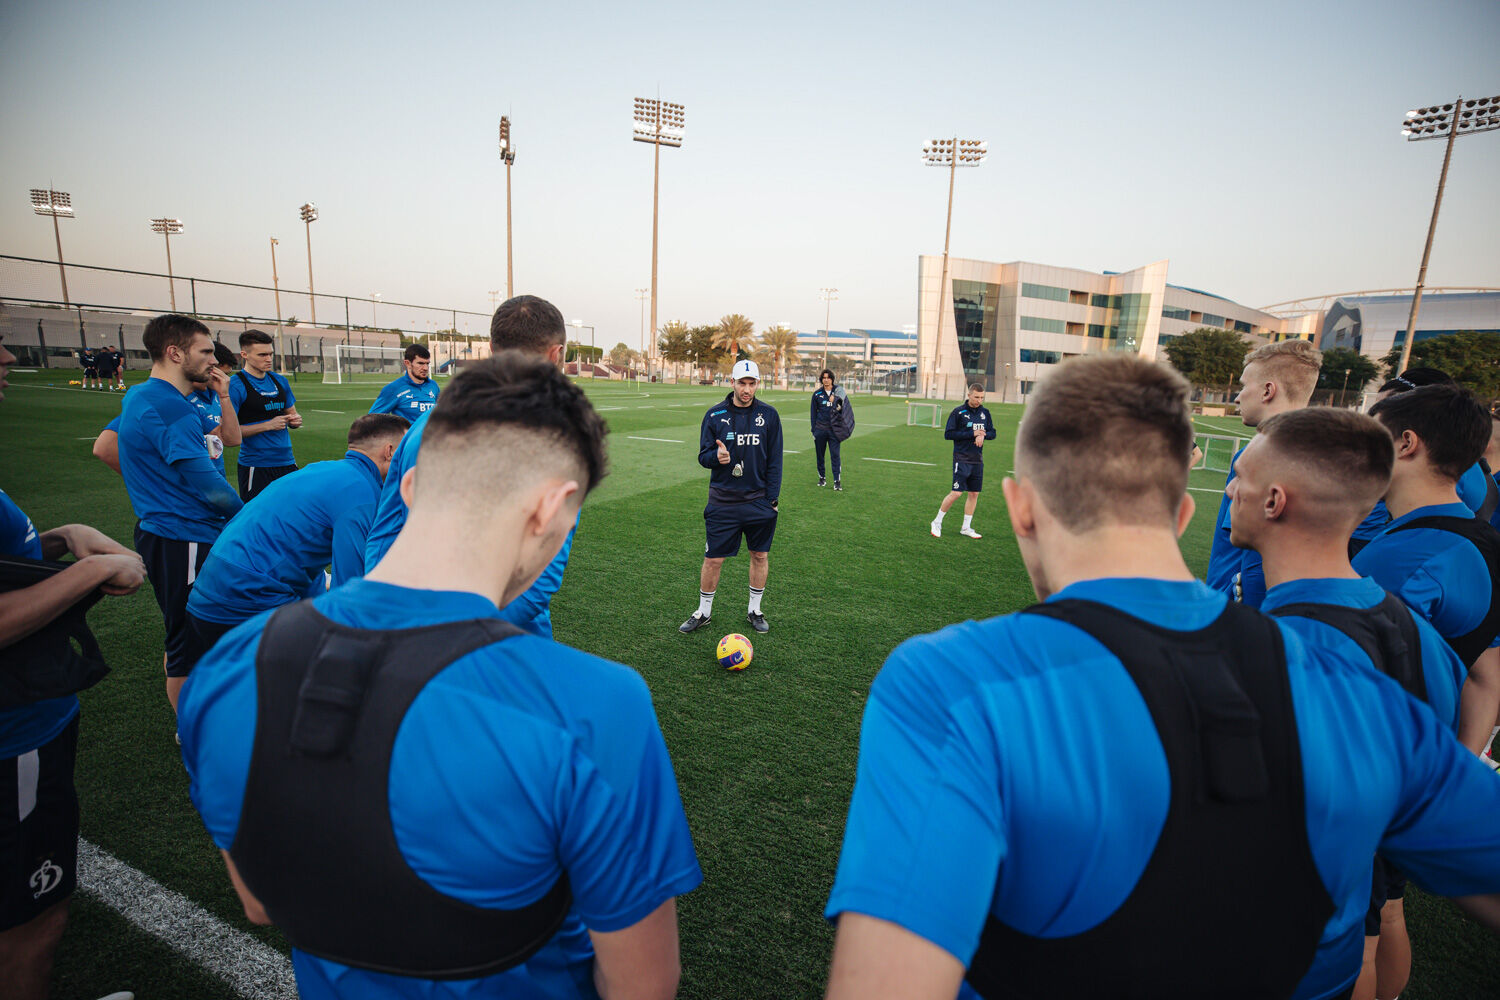 Photo gallery from the VTB training camp in Qatar